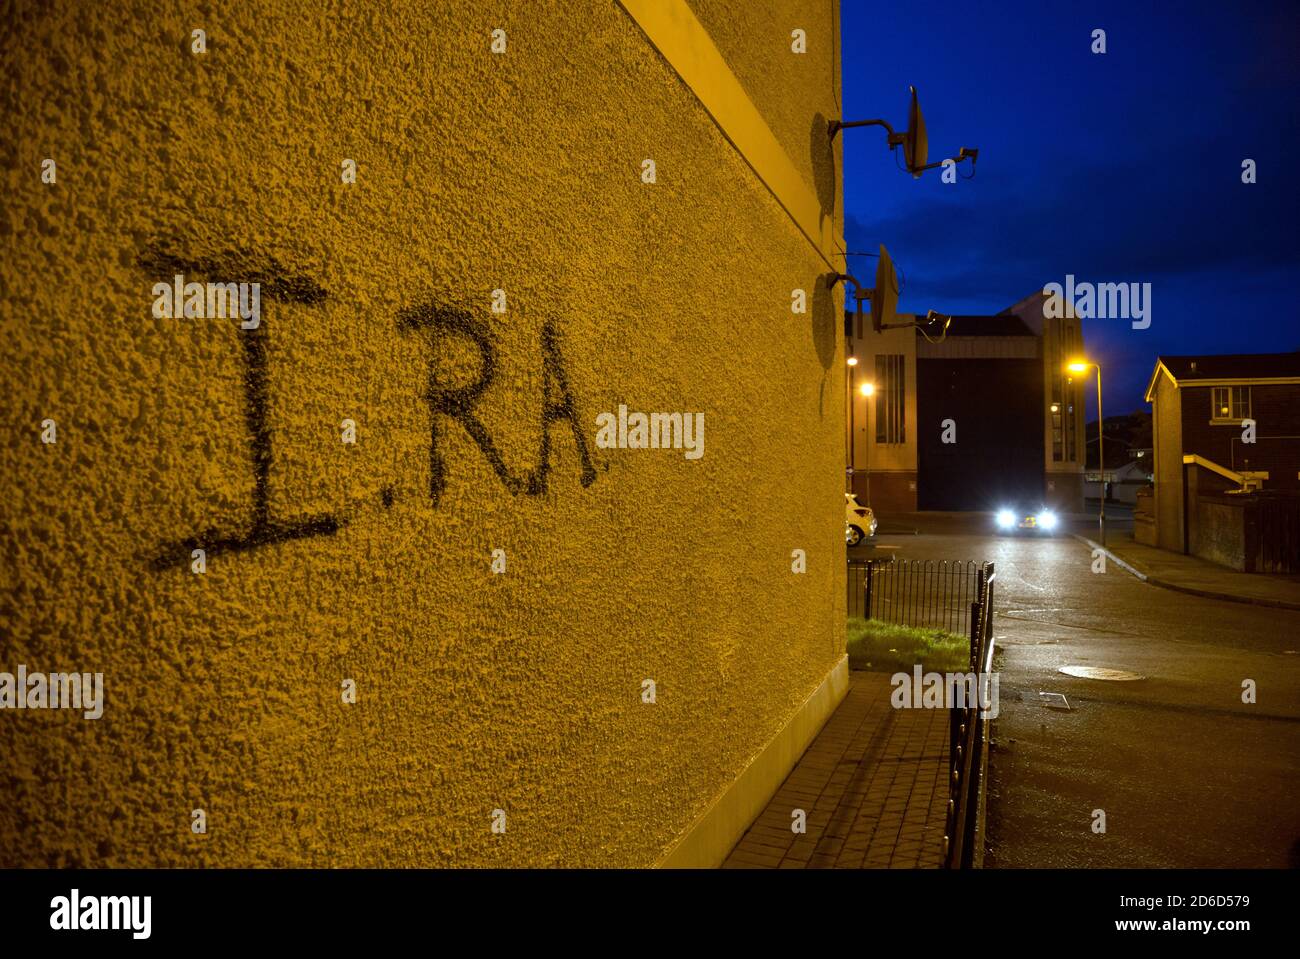 17.07.2019, Derry, Northern Ireland, United Kingdom - IRA graffiti on a wall, workers' housing estate in the Catholic district of Bogside. Derry is a Stock Photo